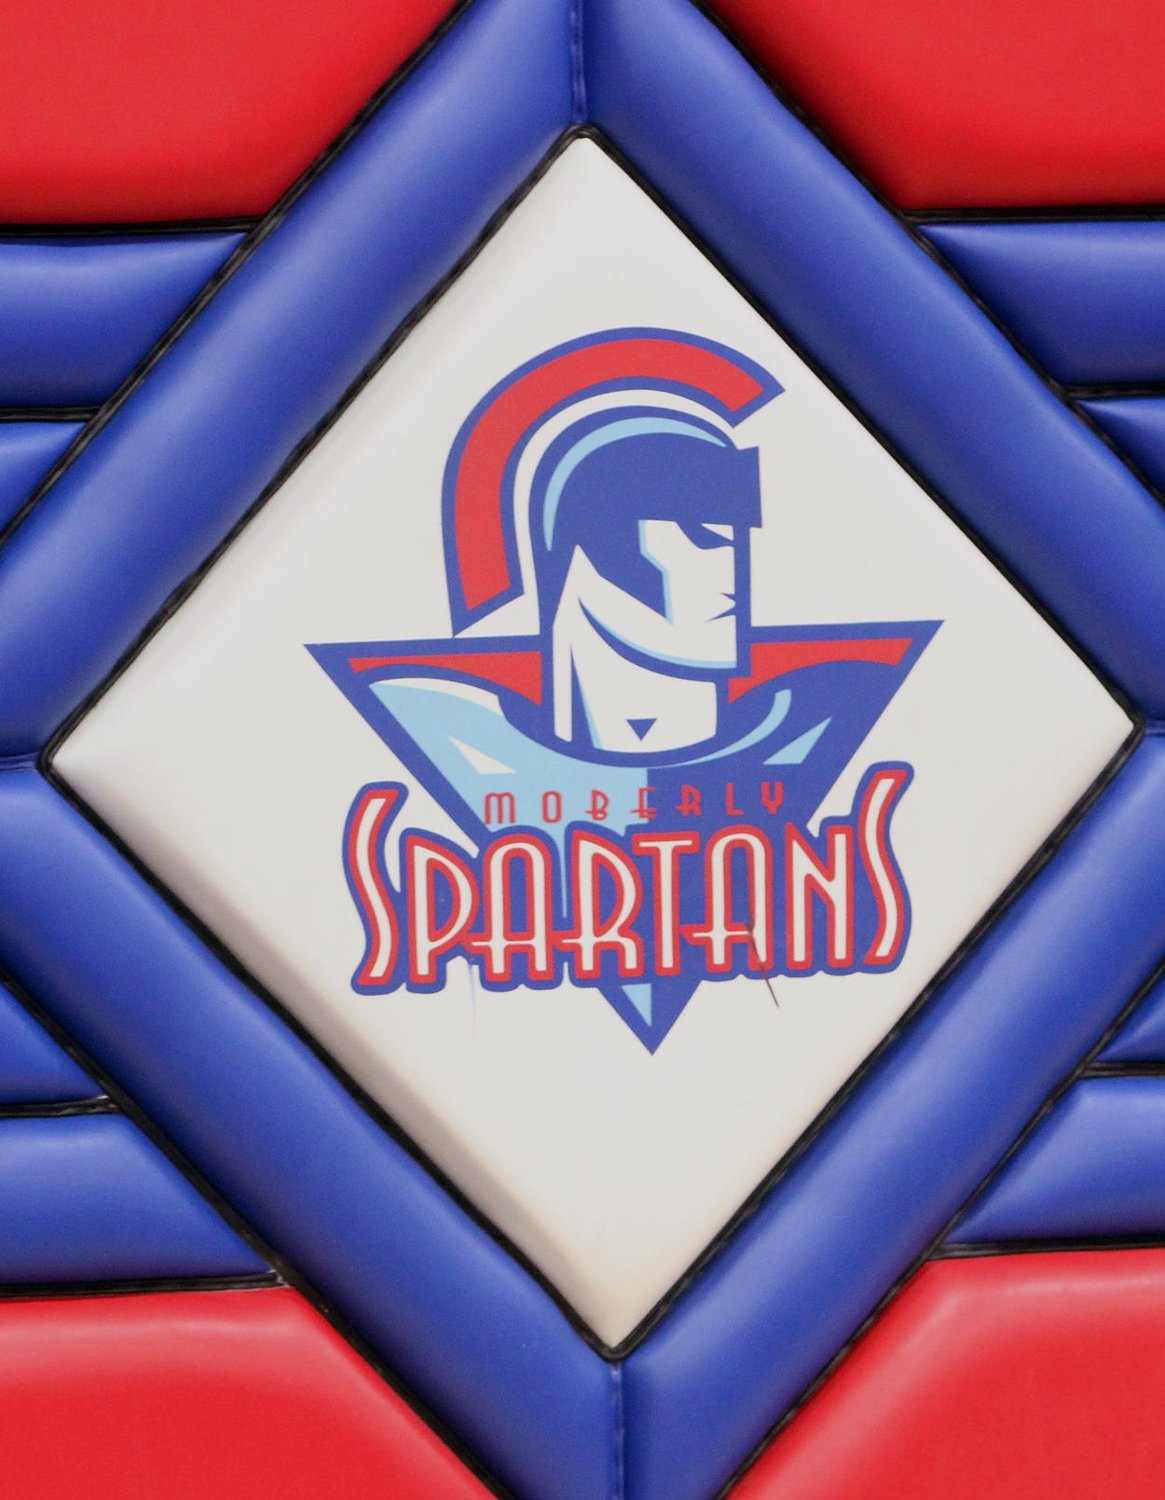 Moberly Spartans logo